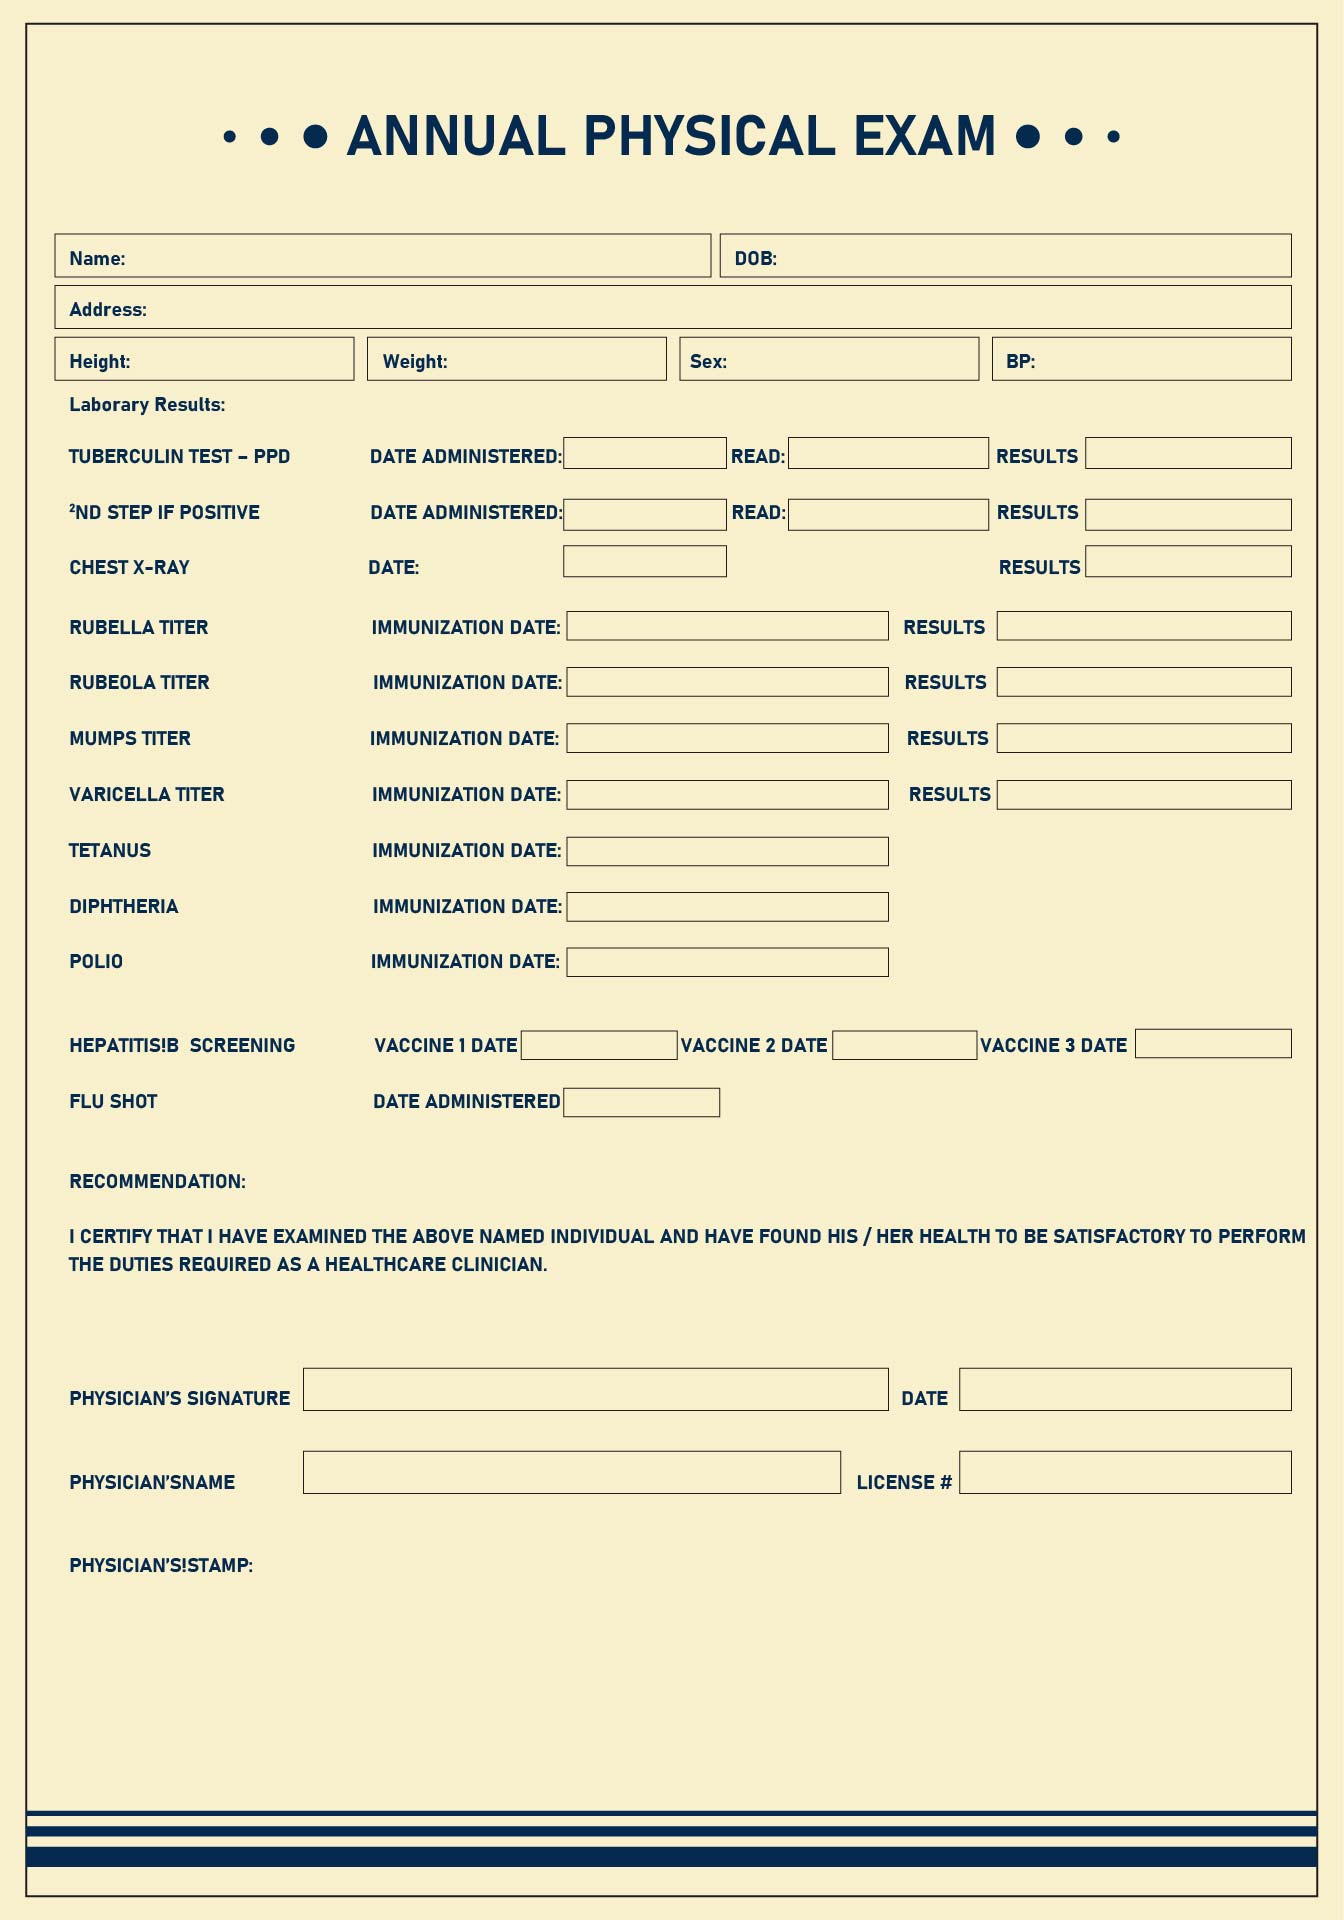 9 Best Images of Medical Physical Examination Forms Printable Medical